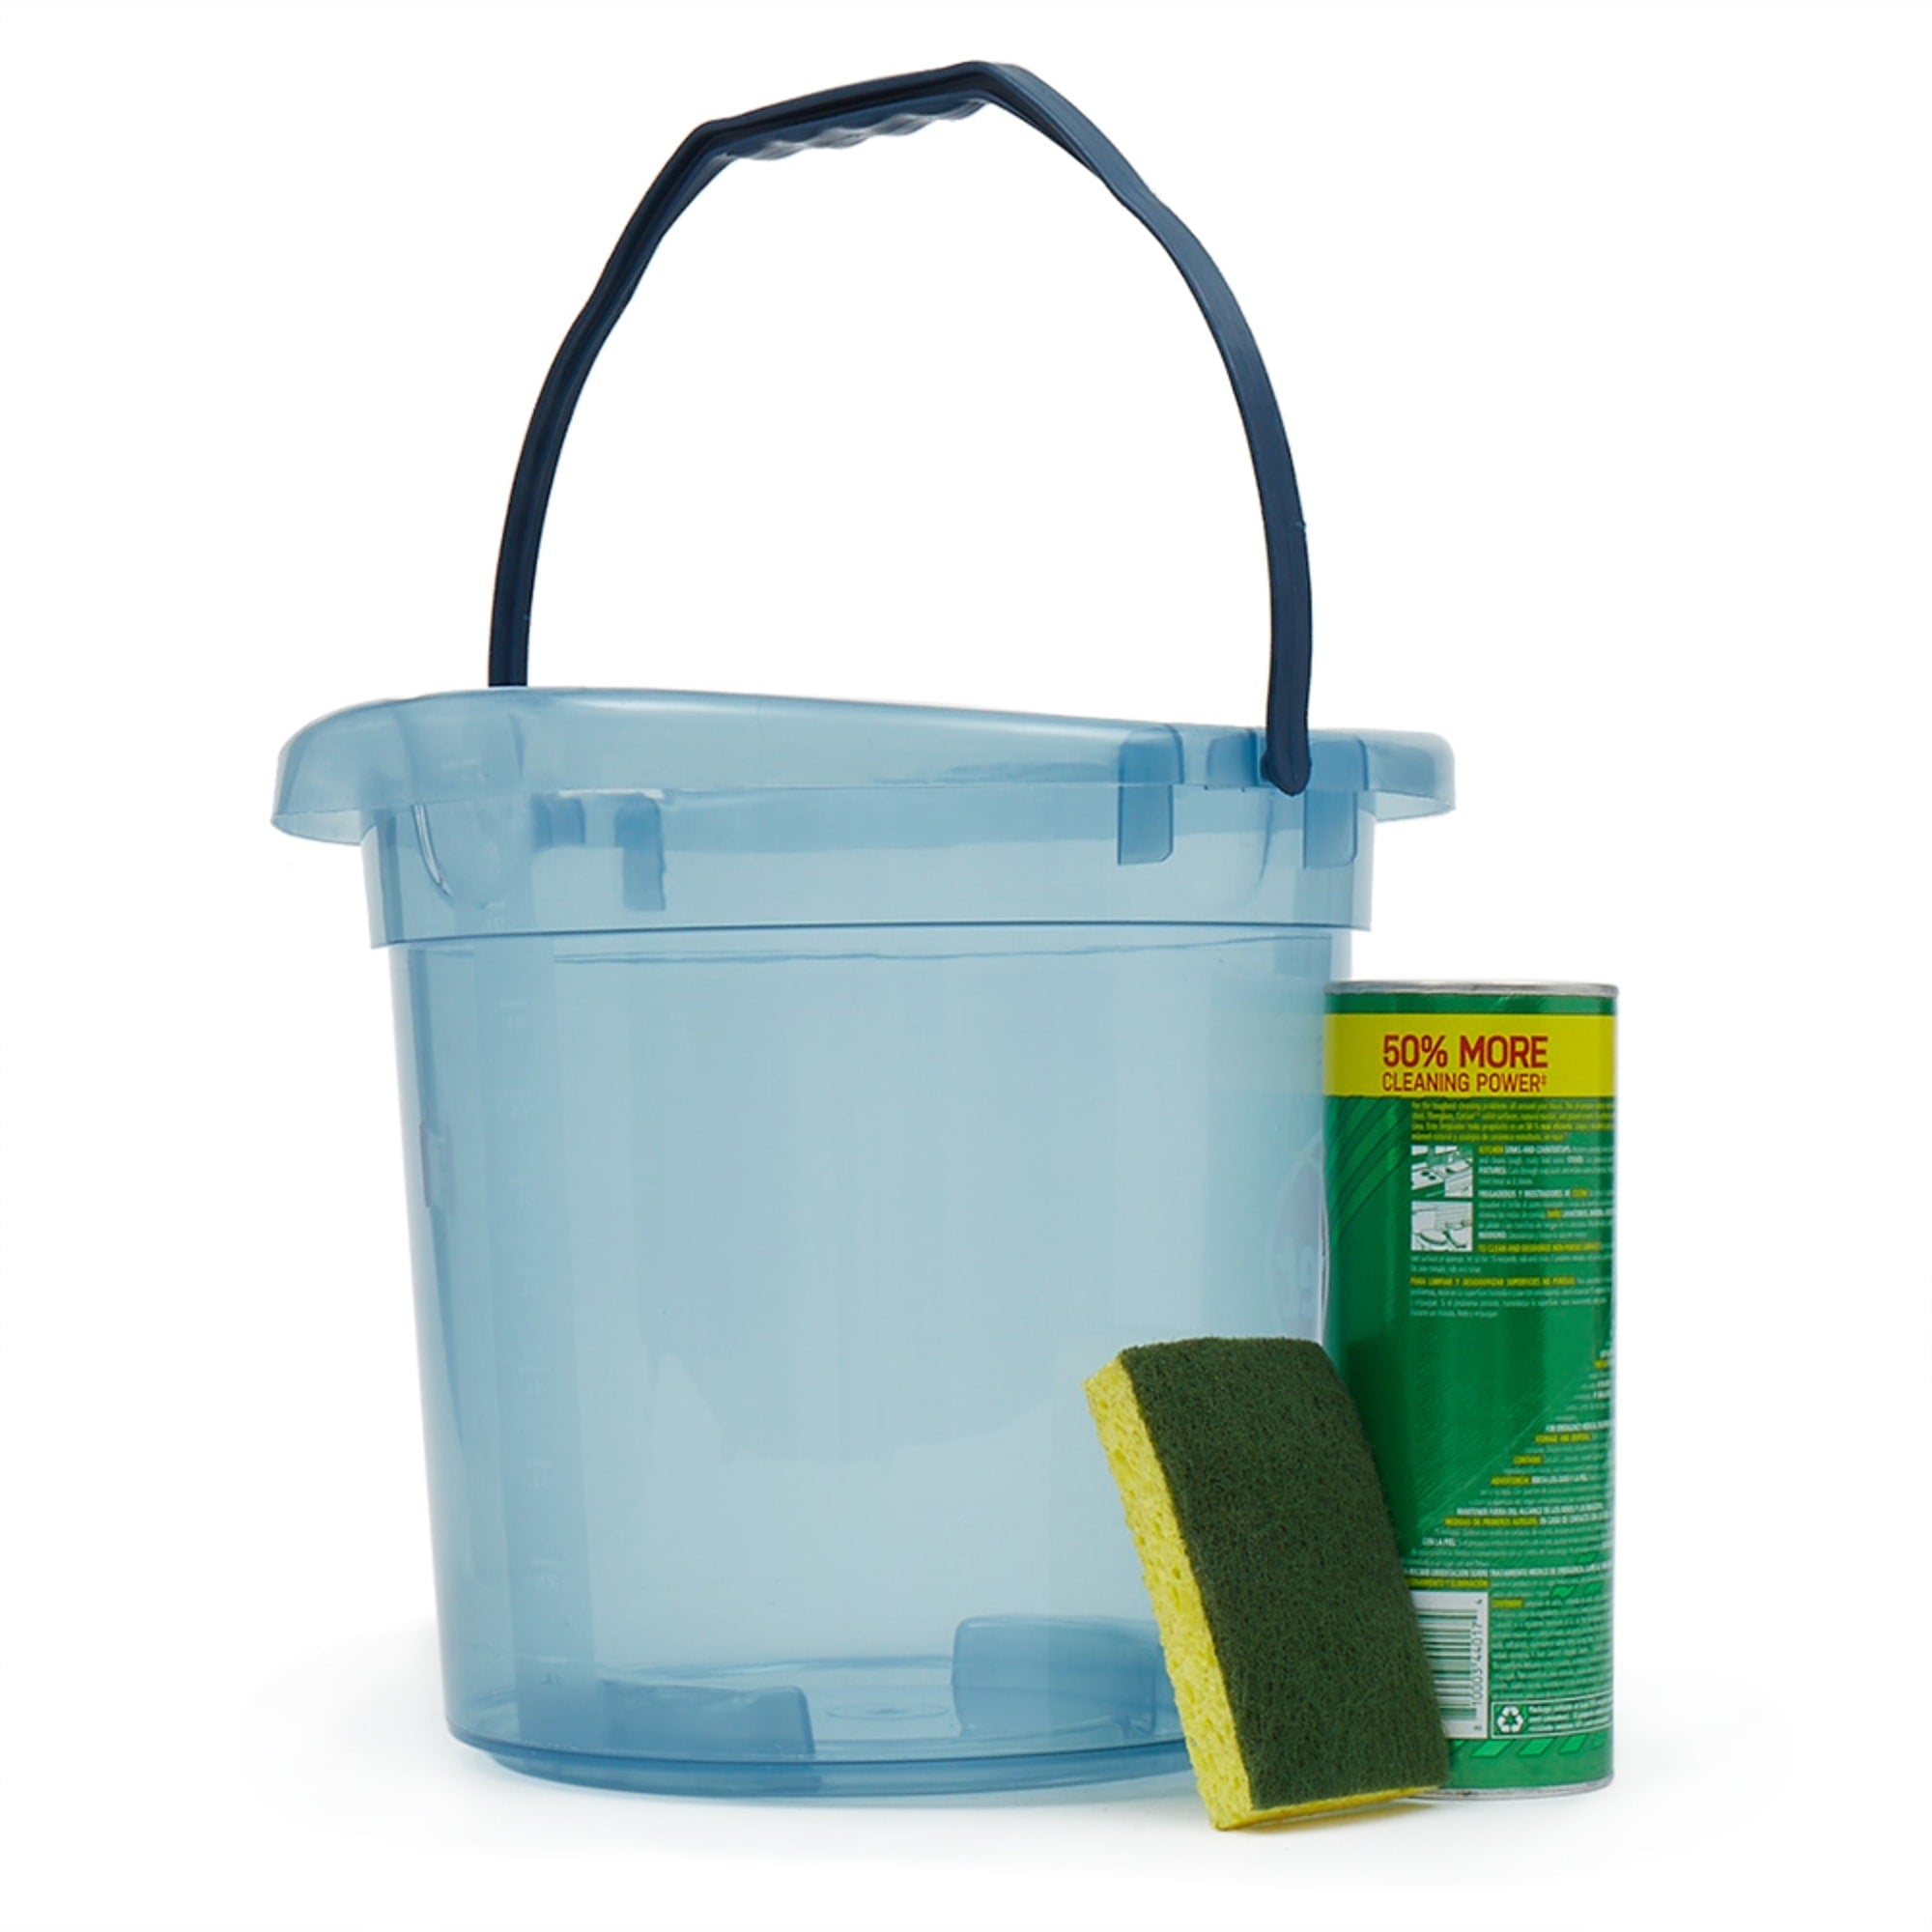 Home Basics 11 Lt Plastic Bucket with Fold Down Handle $5 EACH, CASE PACK OF 12